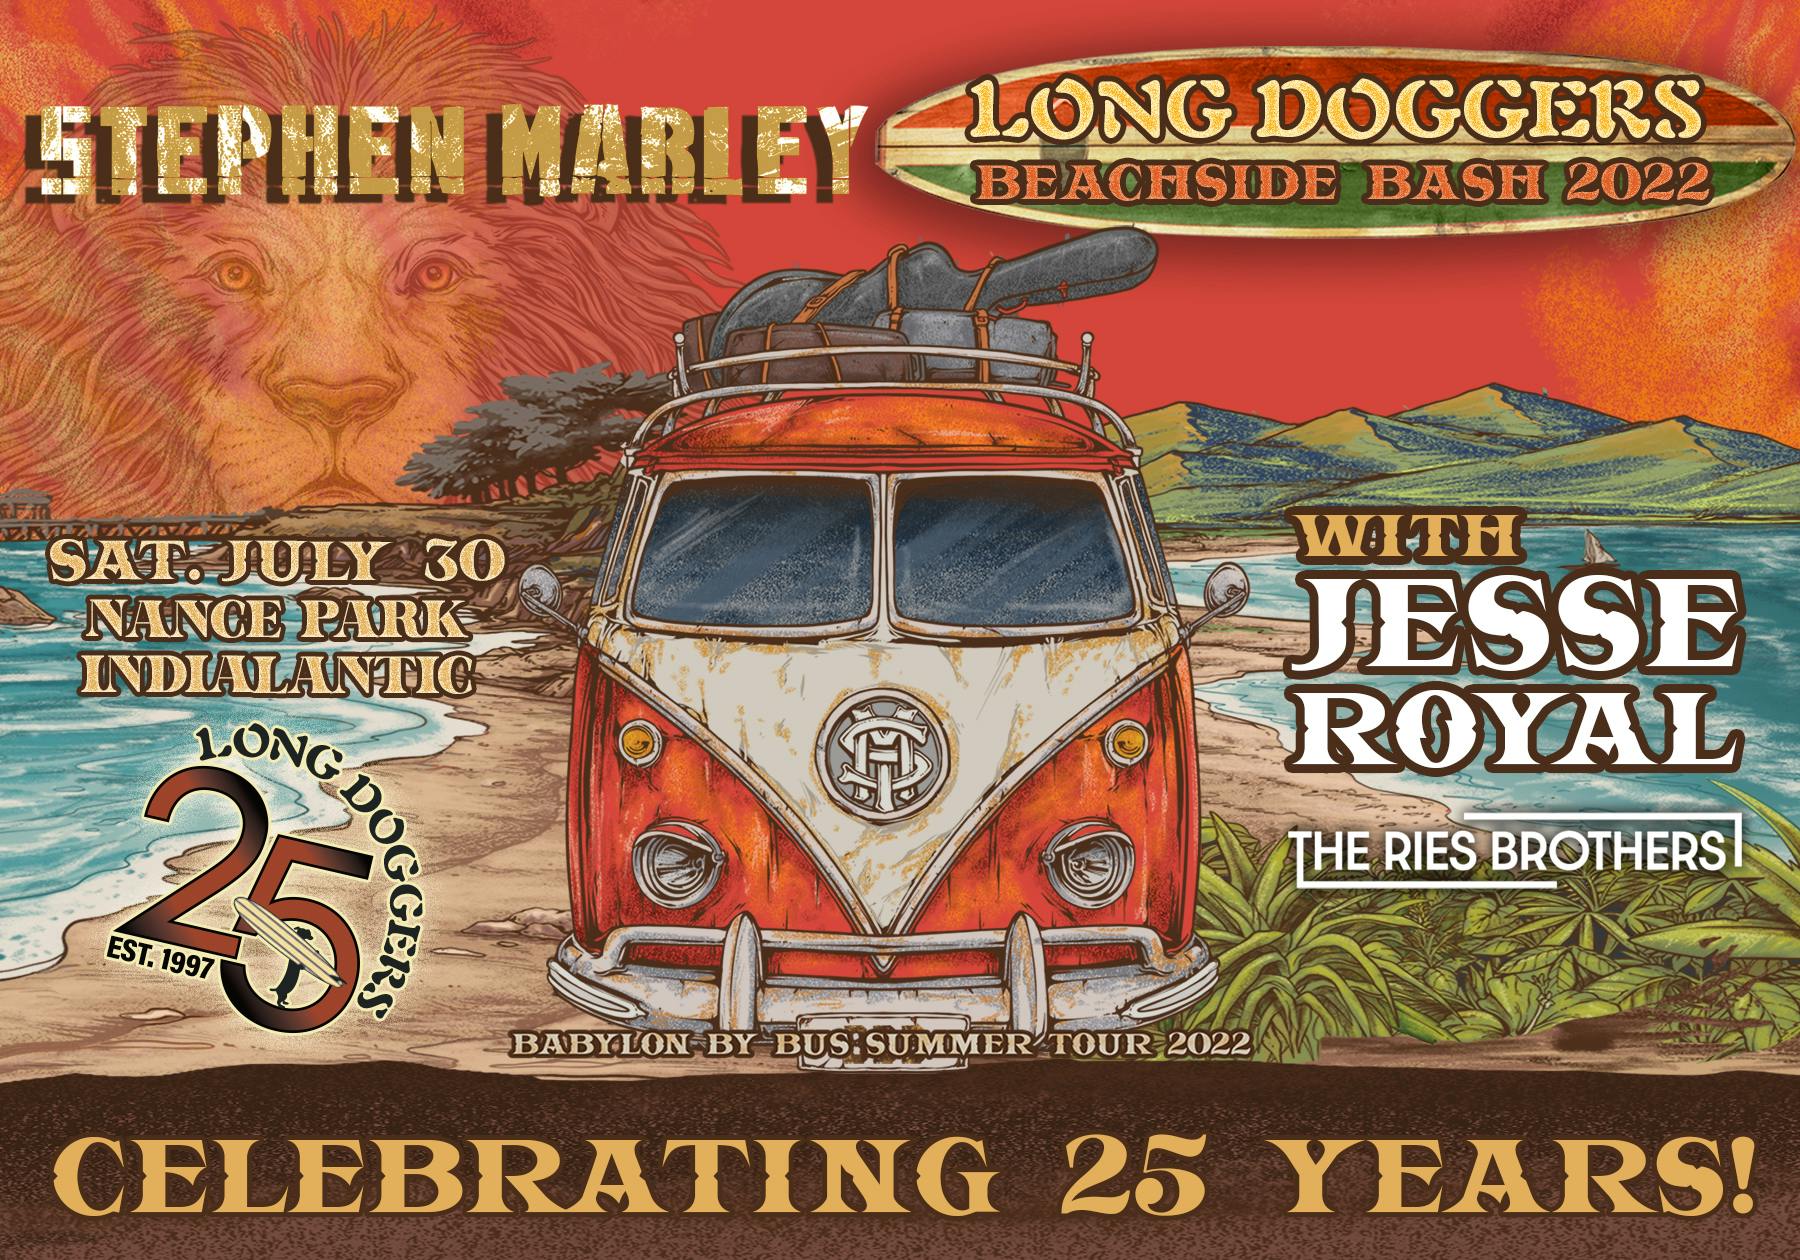 Long Doggers Beachside Bash 22 Featuring Stephen Marley Long Doggers Radically Relaxed Grill Brew